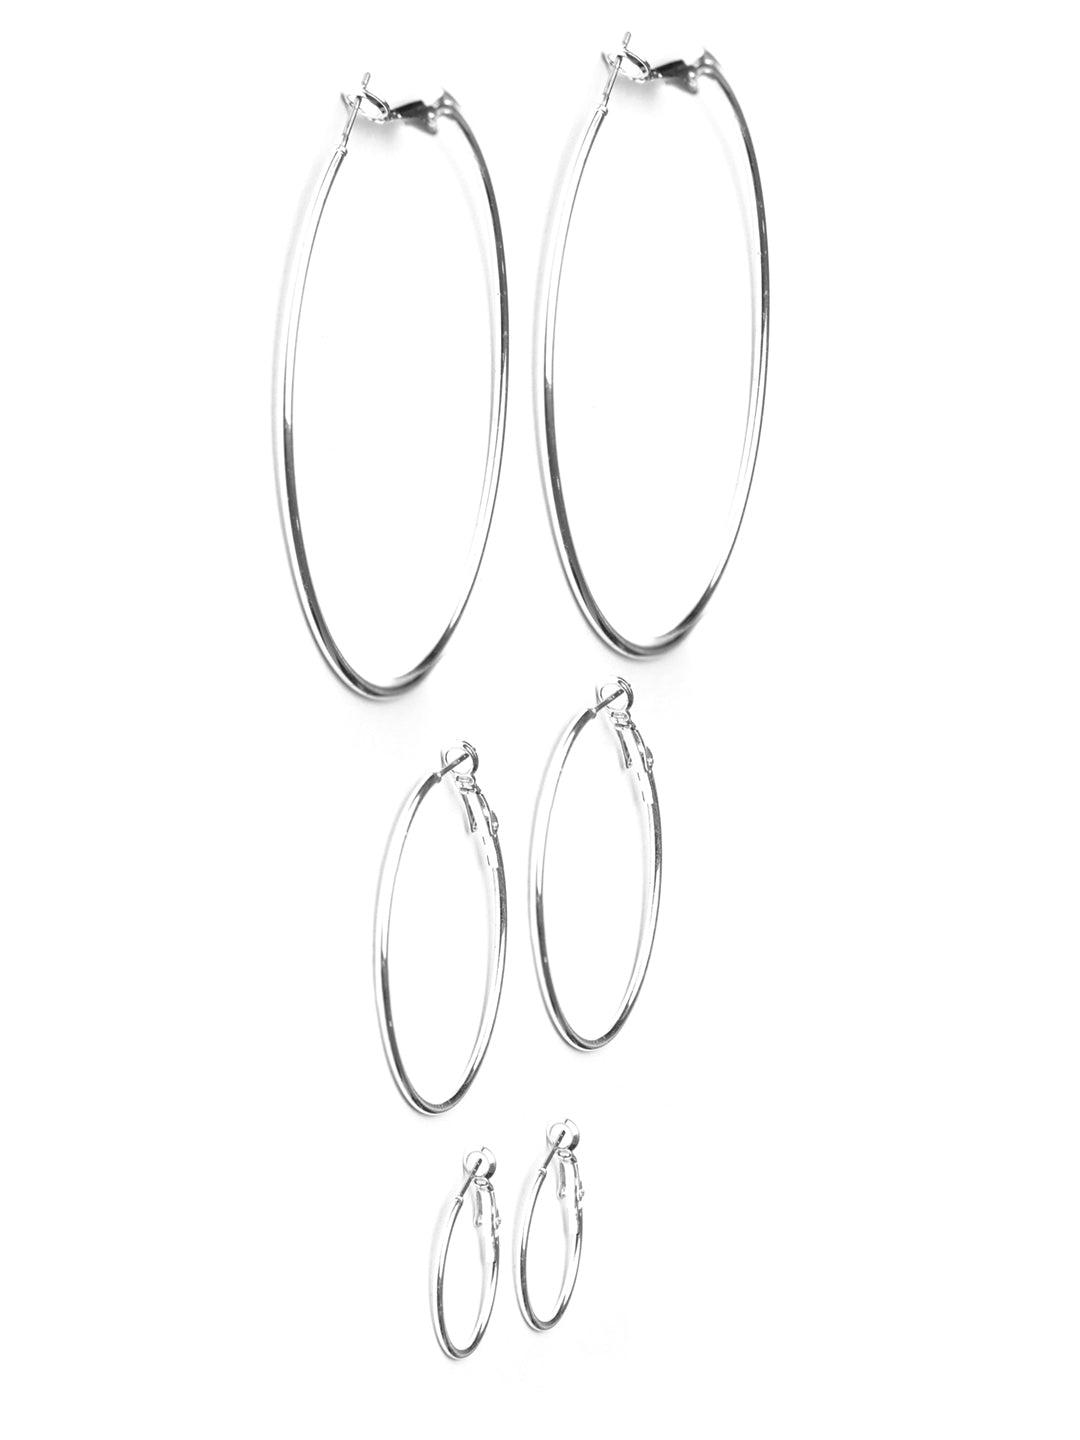 Amazon.com: World Jewels 925 Sterling Silver Classic Large 2-Inch Round Hoop  Earrings for Women - Italian Made, Lightweight Hoop Earrings, Silver Hoop  Earrings for Women - Hoop Earring Gifts for Women and